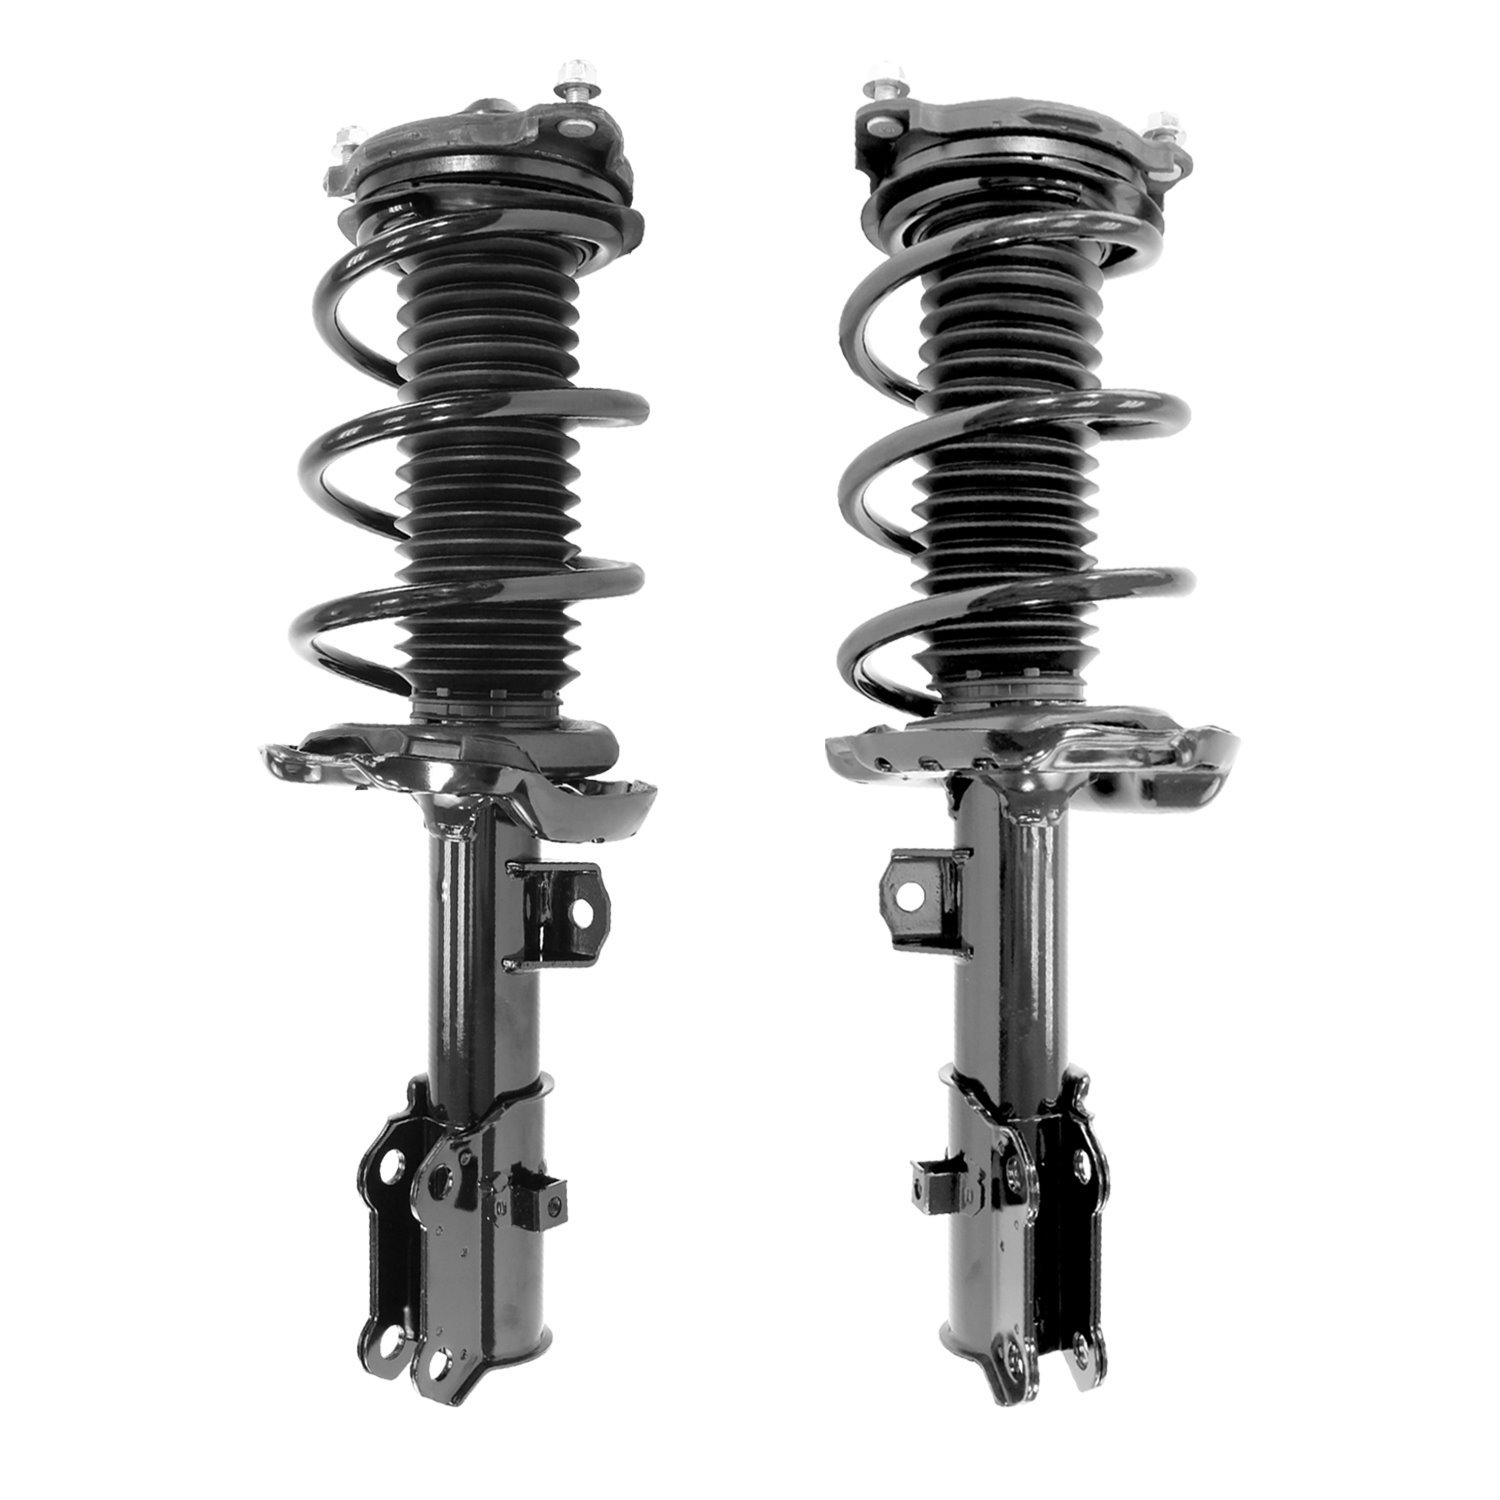 2-13583-13584-001 Front Suspension Strut & Coil Spring Assemby Set Fits Select Hyundai Elantra